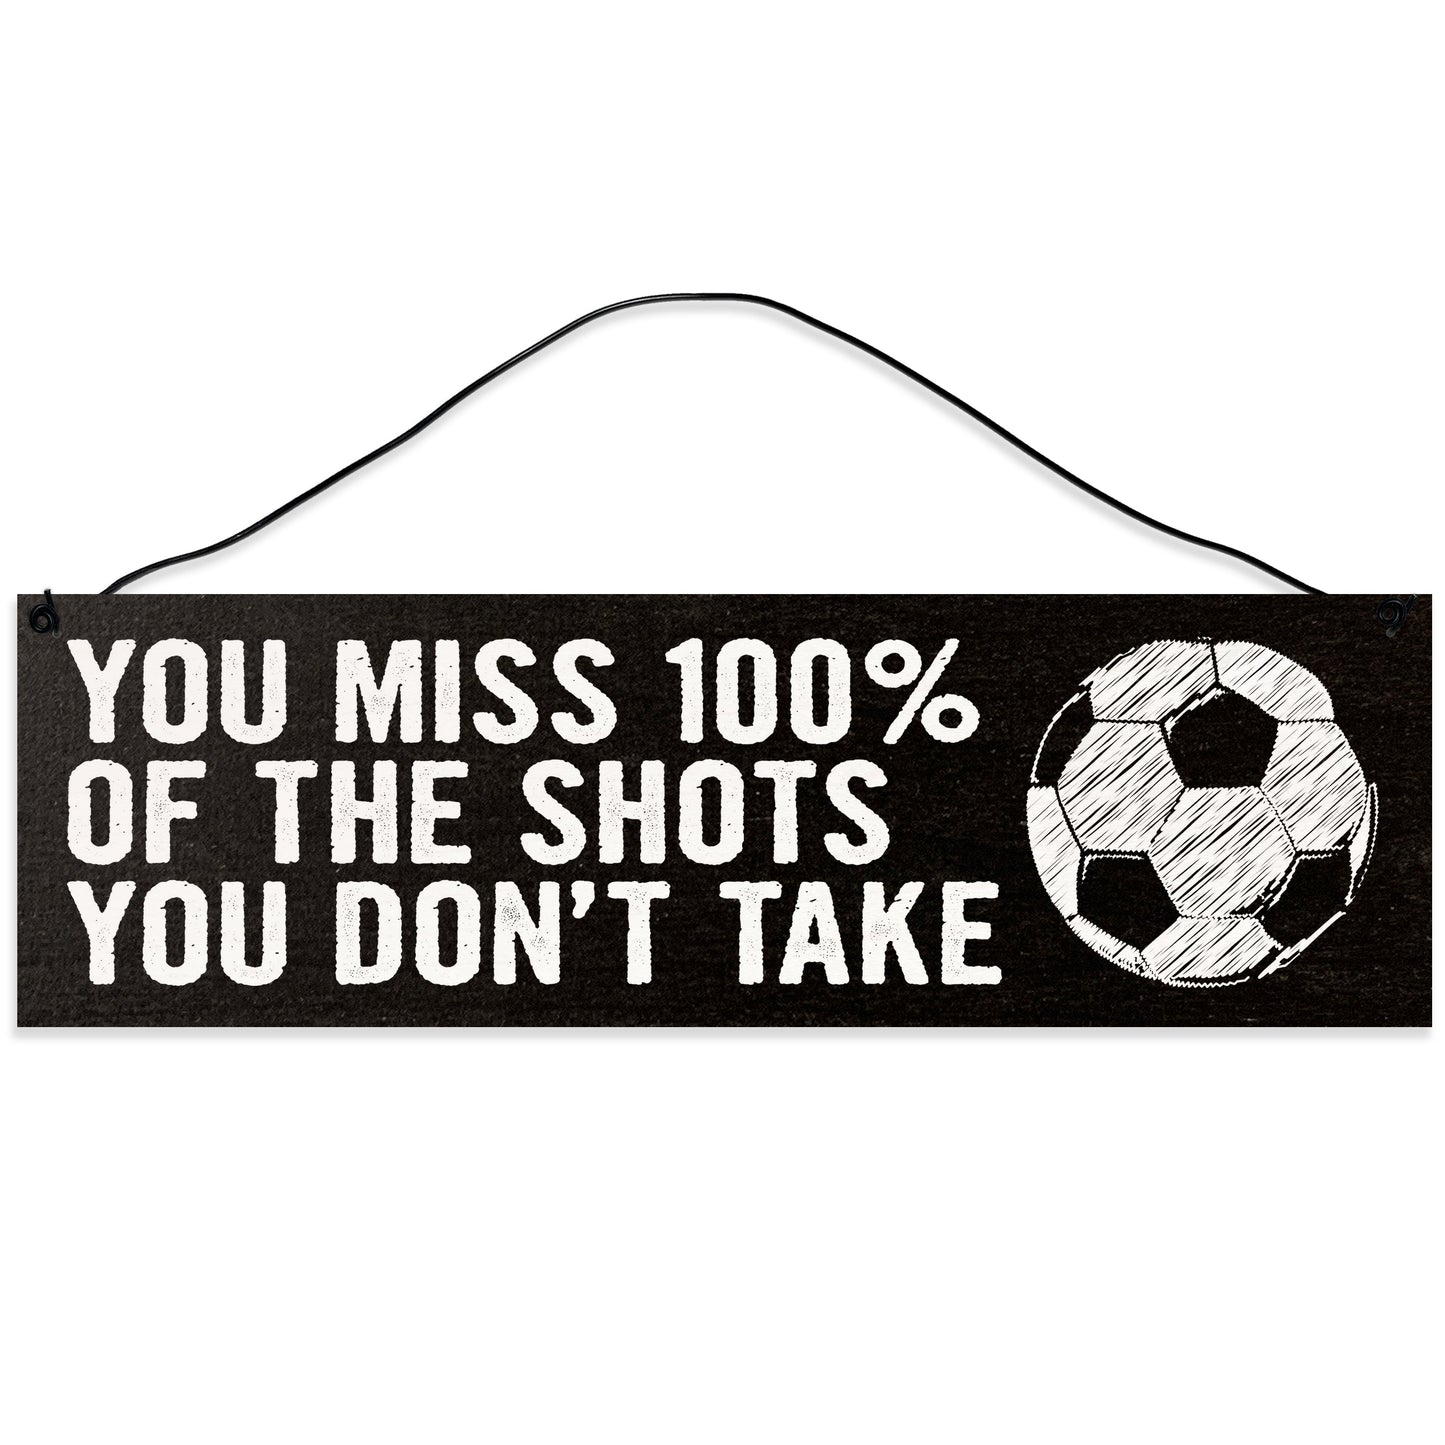 Sawyer's Mill - Soccer. You Miss 100% of the Shots you don't Take. Wood Sign for Home or Office. Measures 3x10 inches.